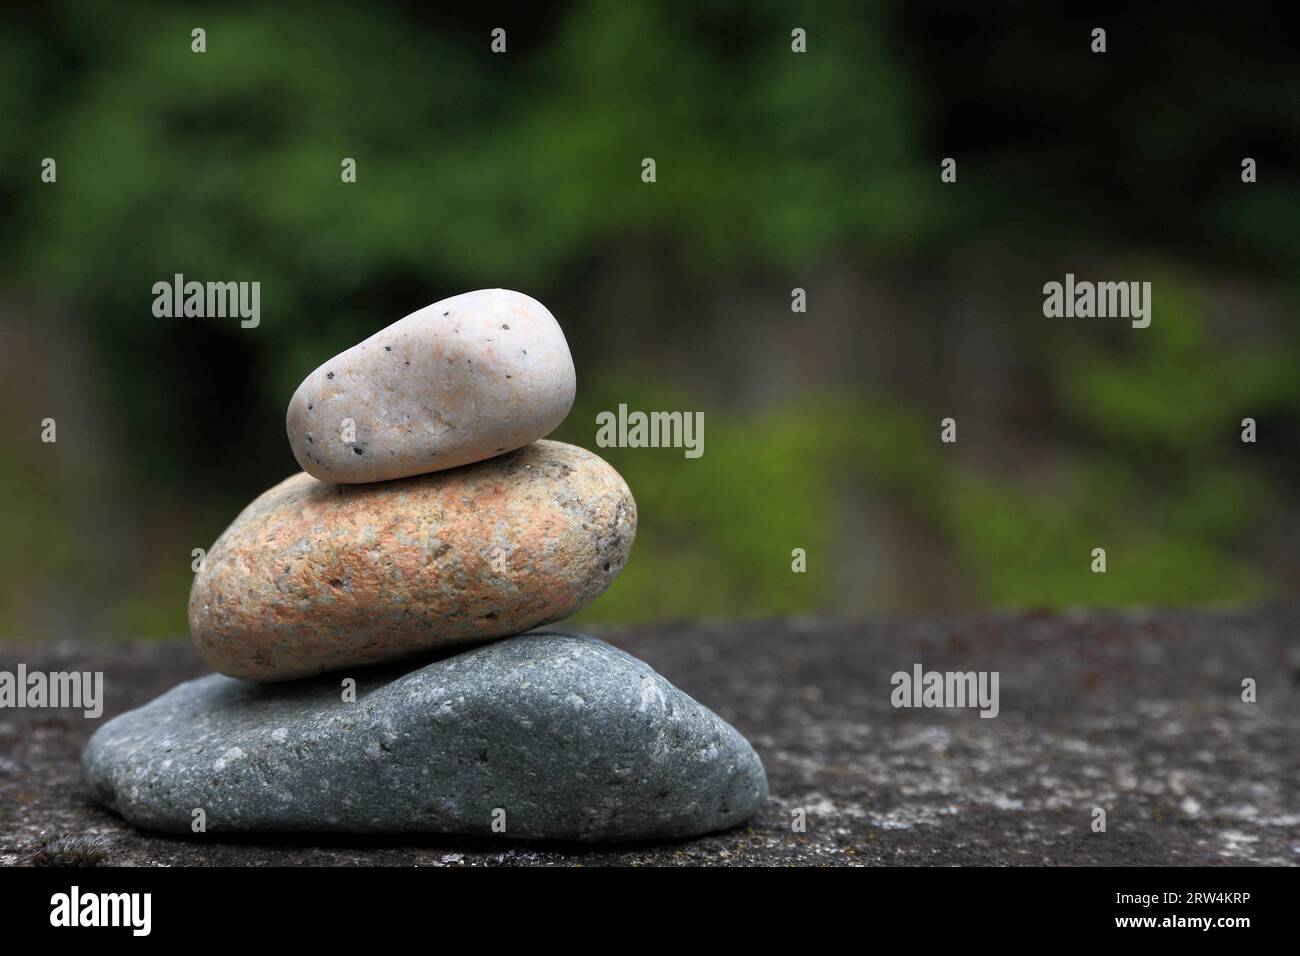 Stone man in nature, taken with depth of field Stock Photo